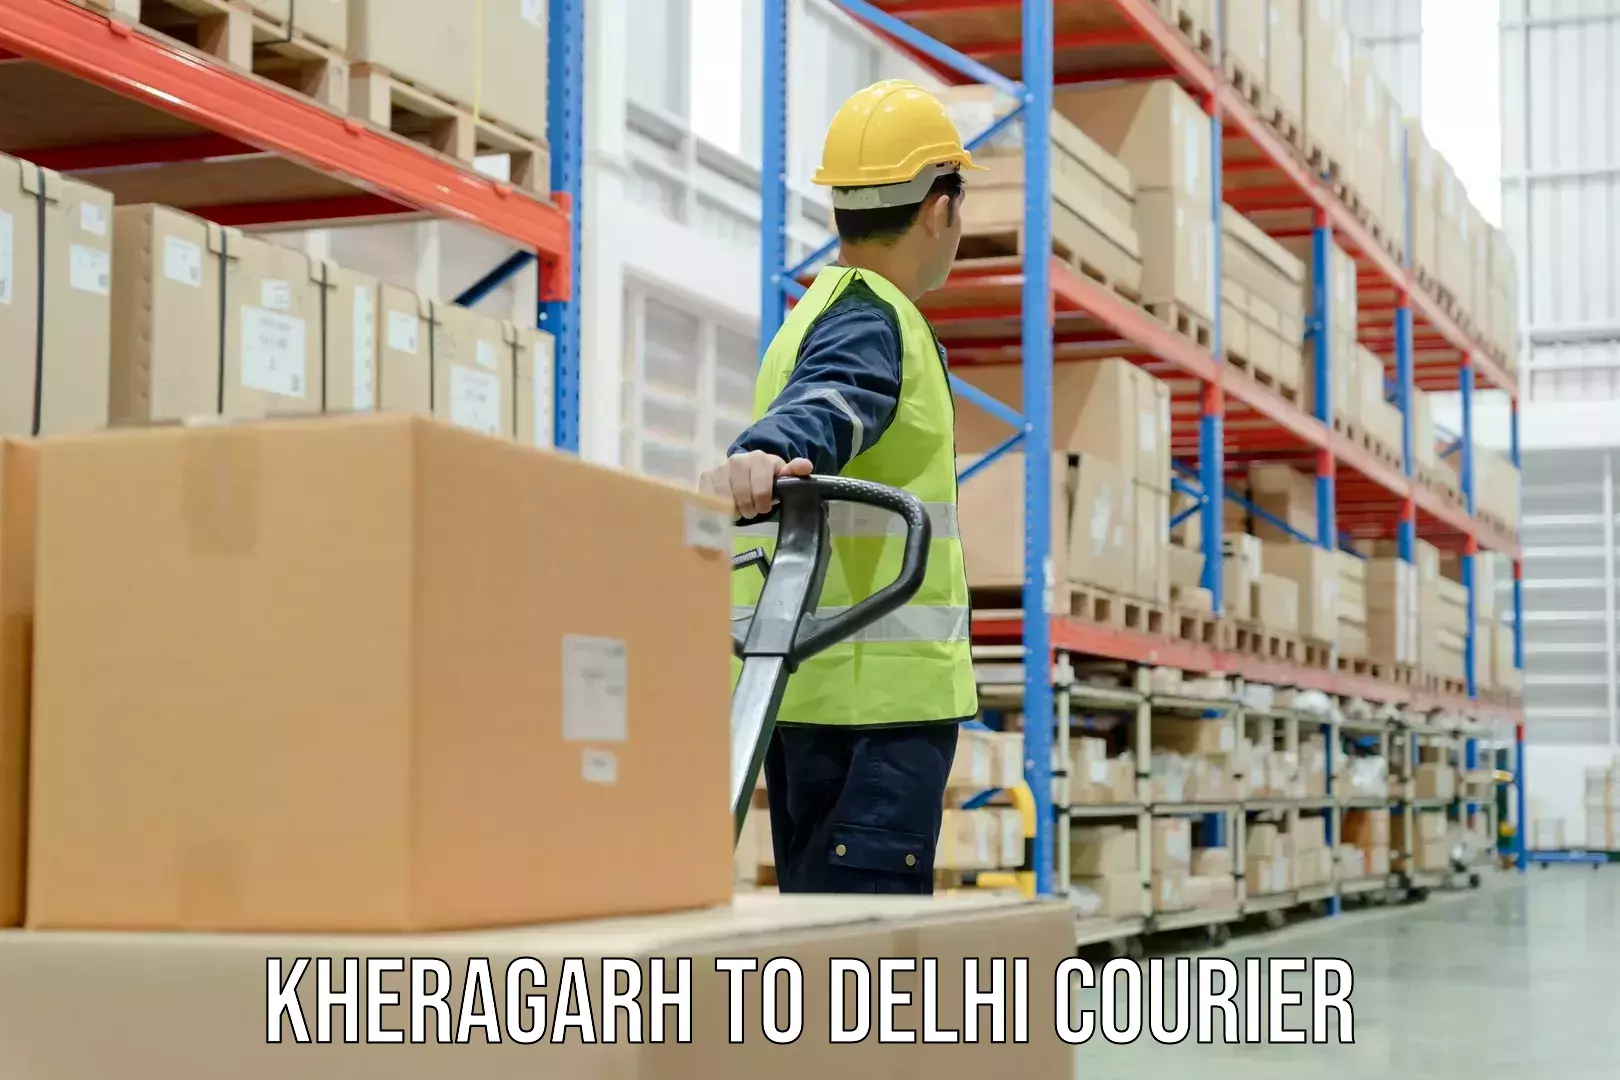 Personal parcel delivery in Kheragarh to University of Delhi